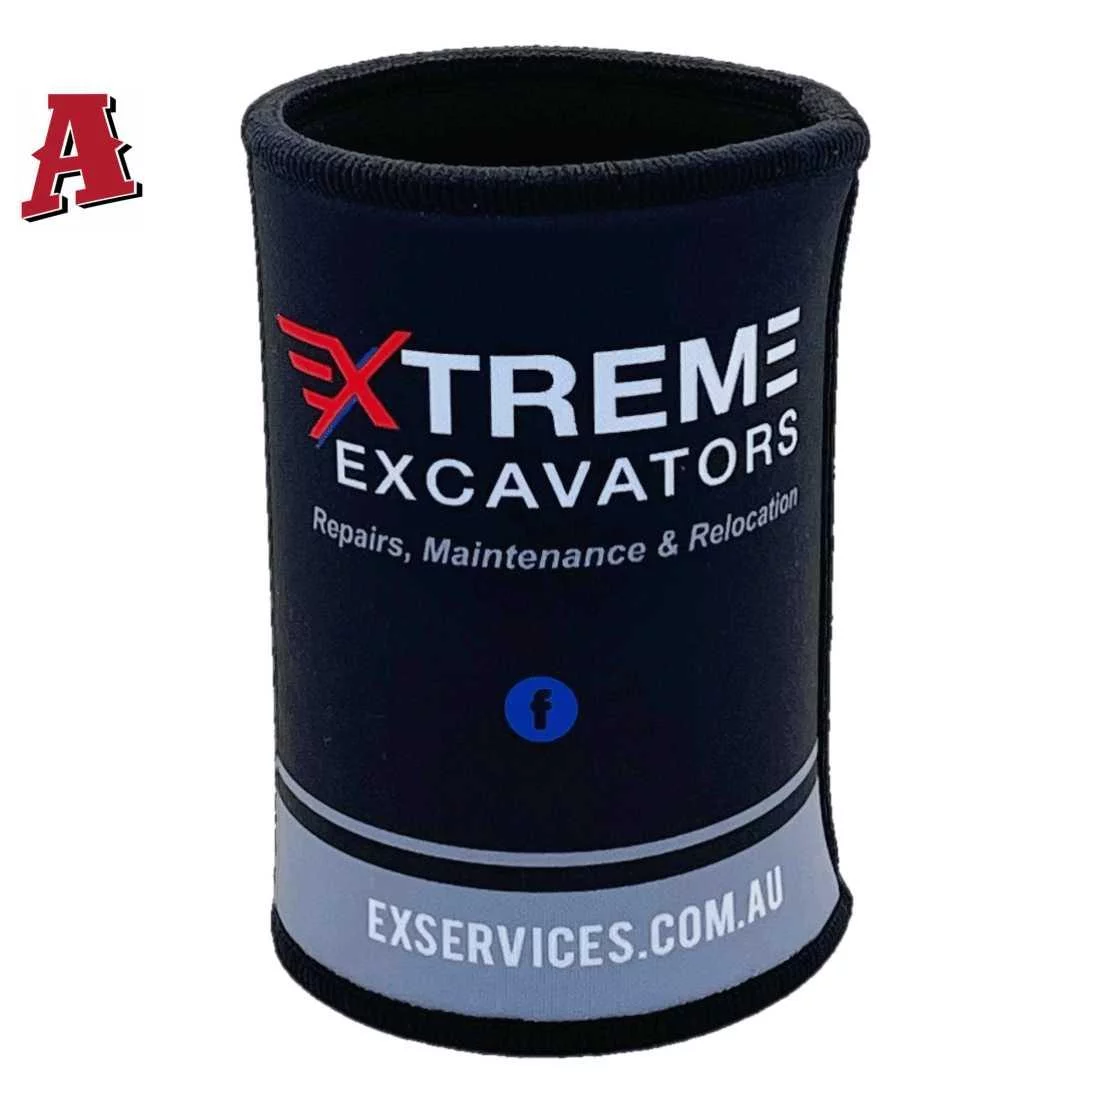 Extreme Excavators Paget Qld Custom Stubby Holder - Koozies - 5mm Neoprene with Glued & Stitched Seams Top & Bottom Black